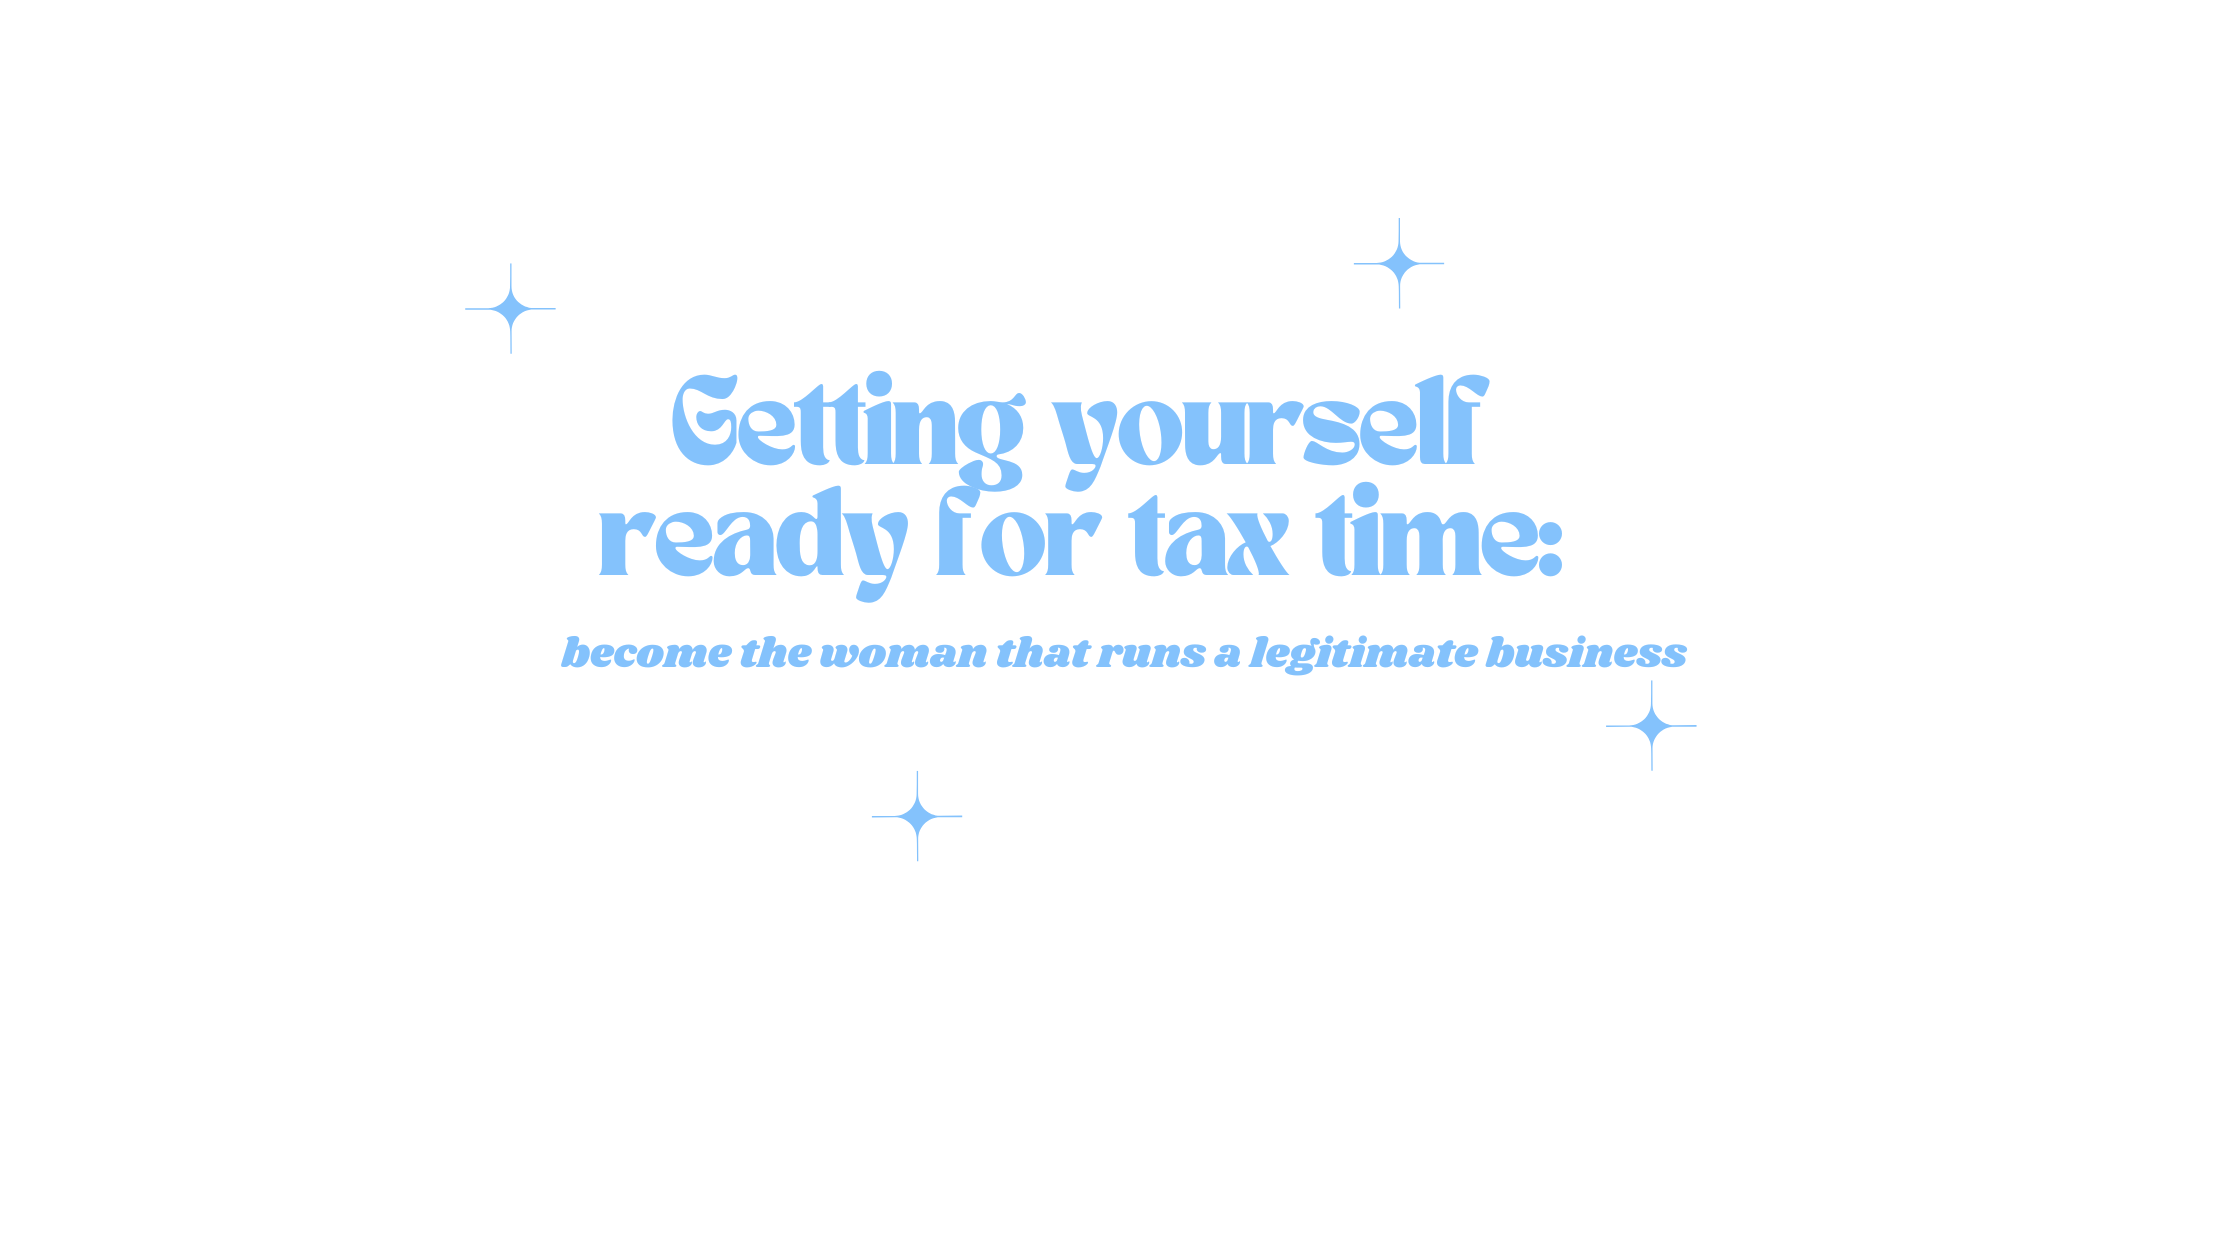 Getting yourself ready for tax time: become the woman that runs a legitimate business